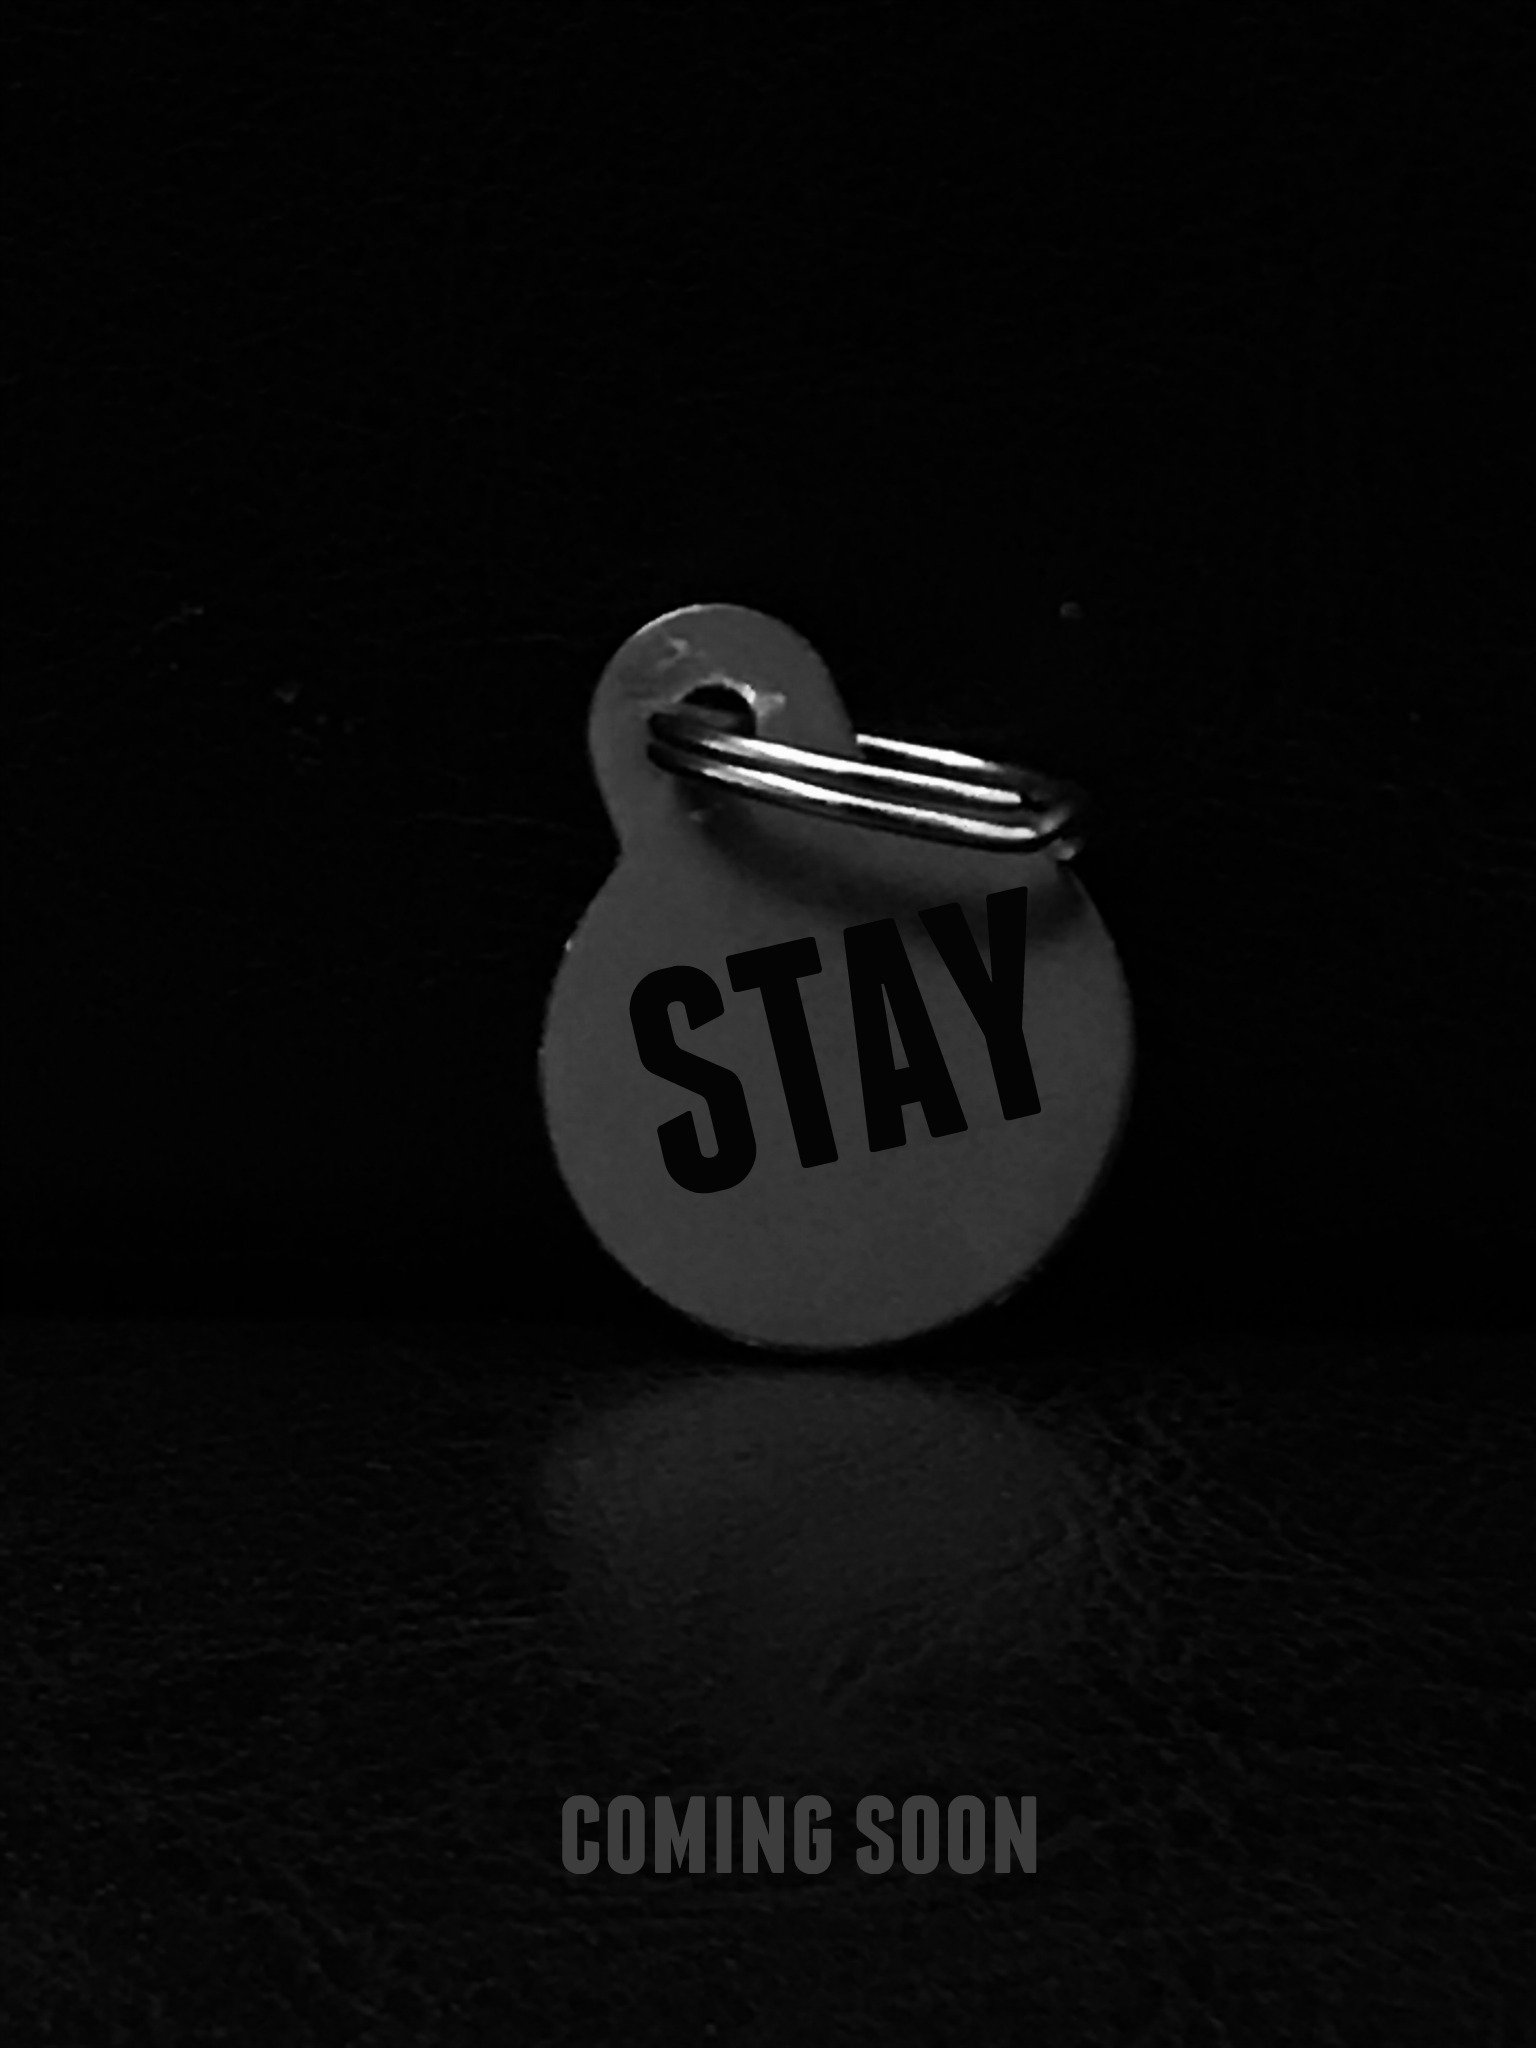 STAY is a short film about a beloved pet's vengeance.